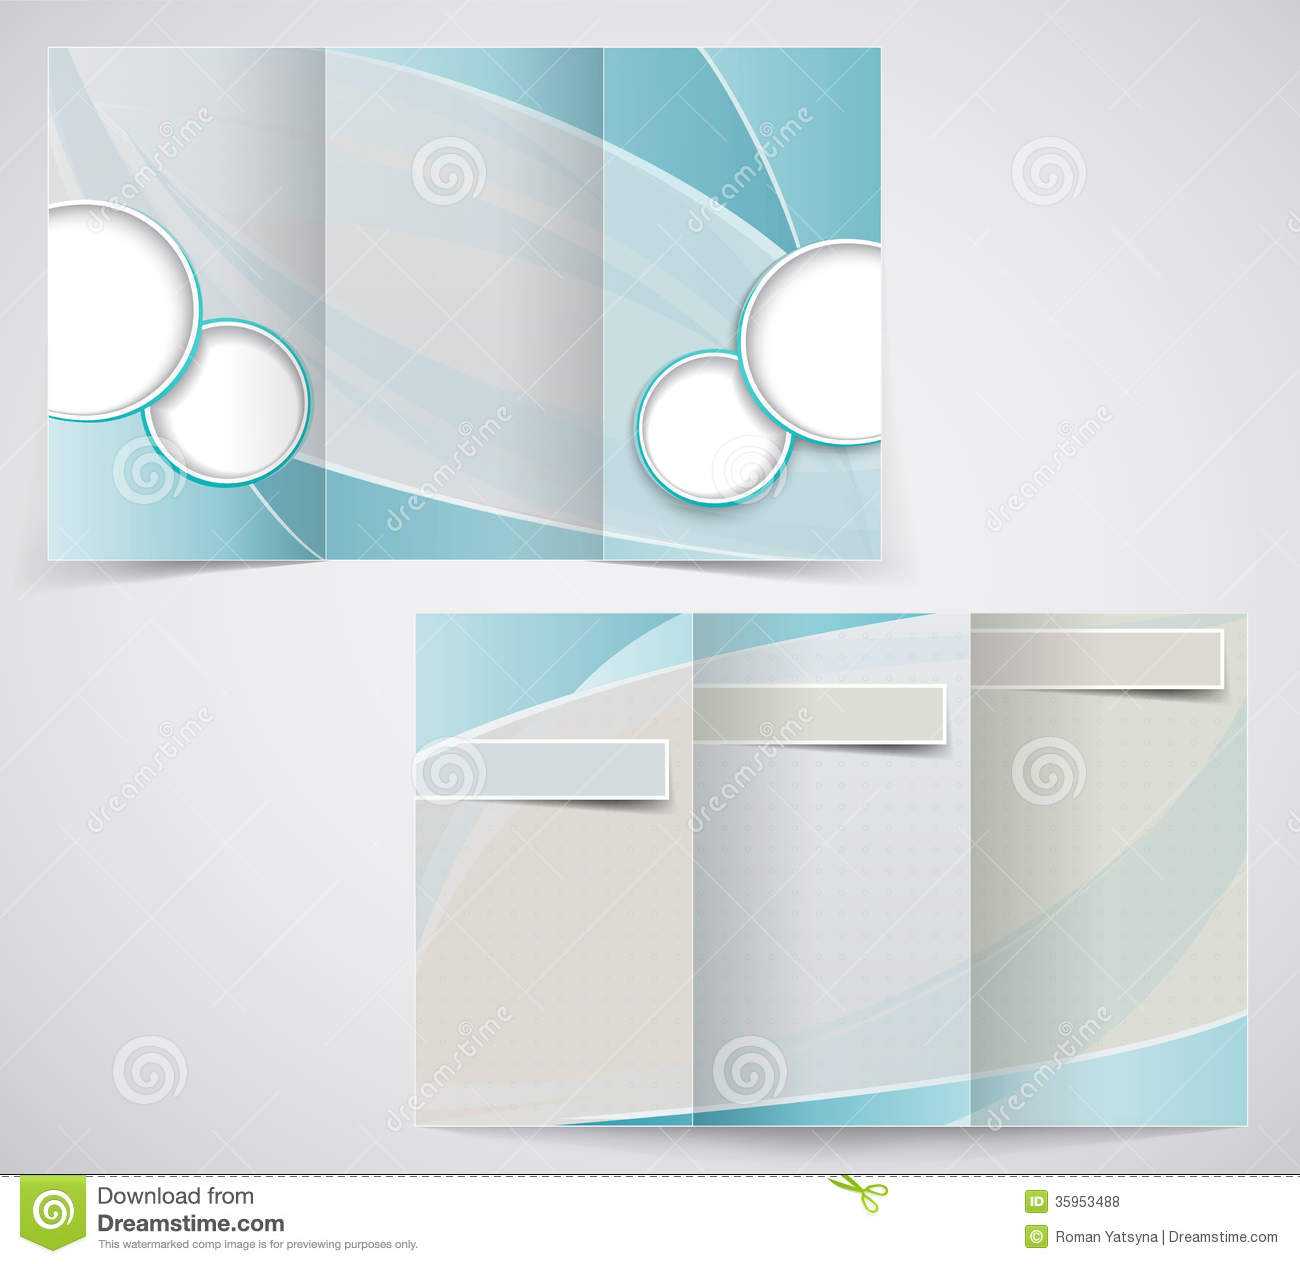 Tri Fold Business Brochure Template, Vector Blue D Stock For Free Illustrator Brochure Templates Download